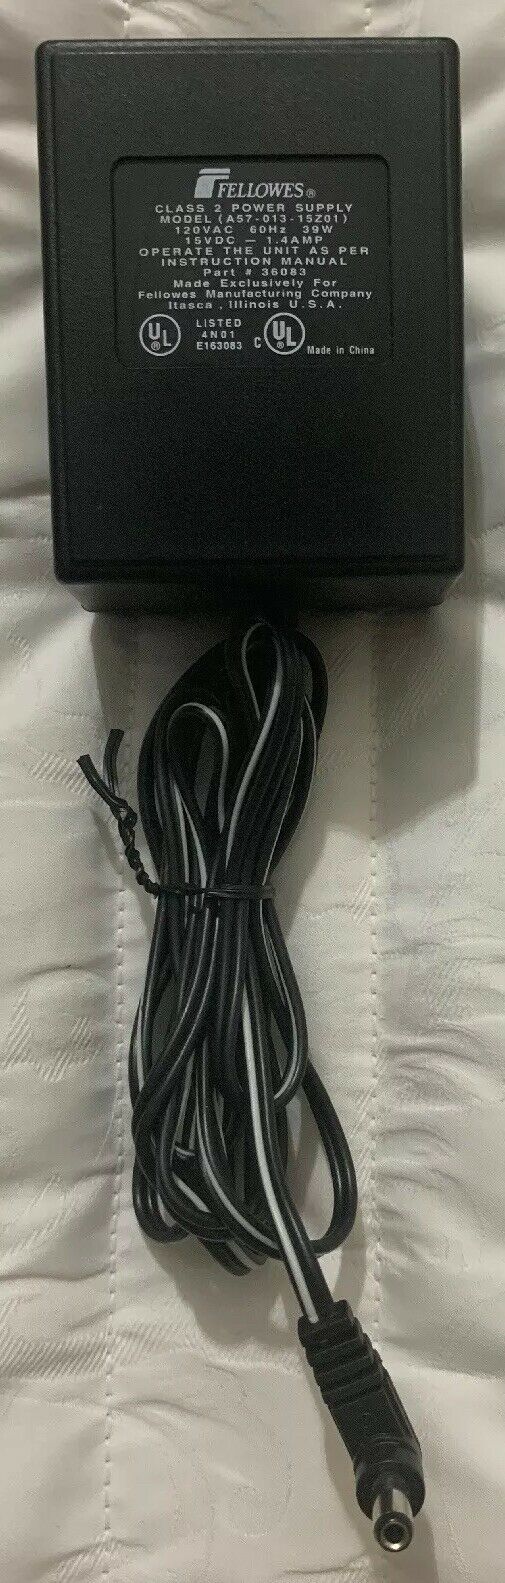 New Fellowes A57-013-15z01 15VDC 1.4A Adapter Power Supply - Click Image to Close